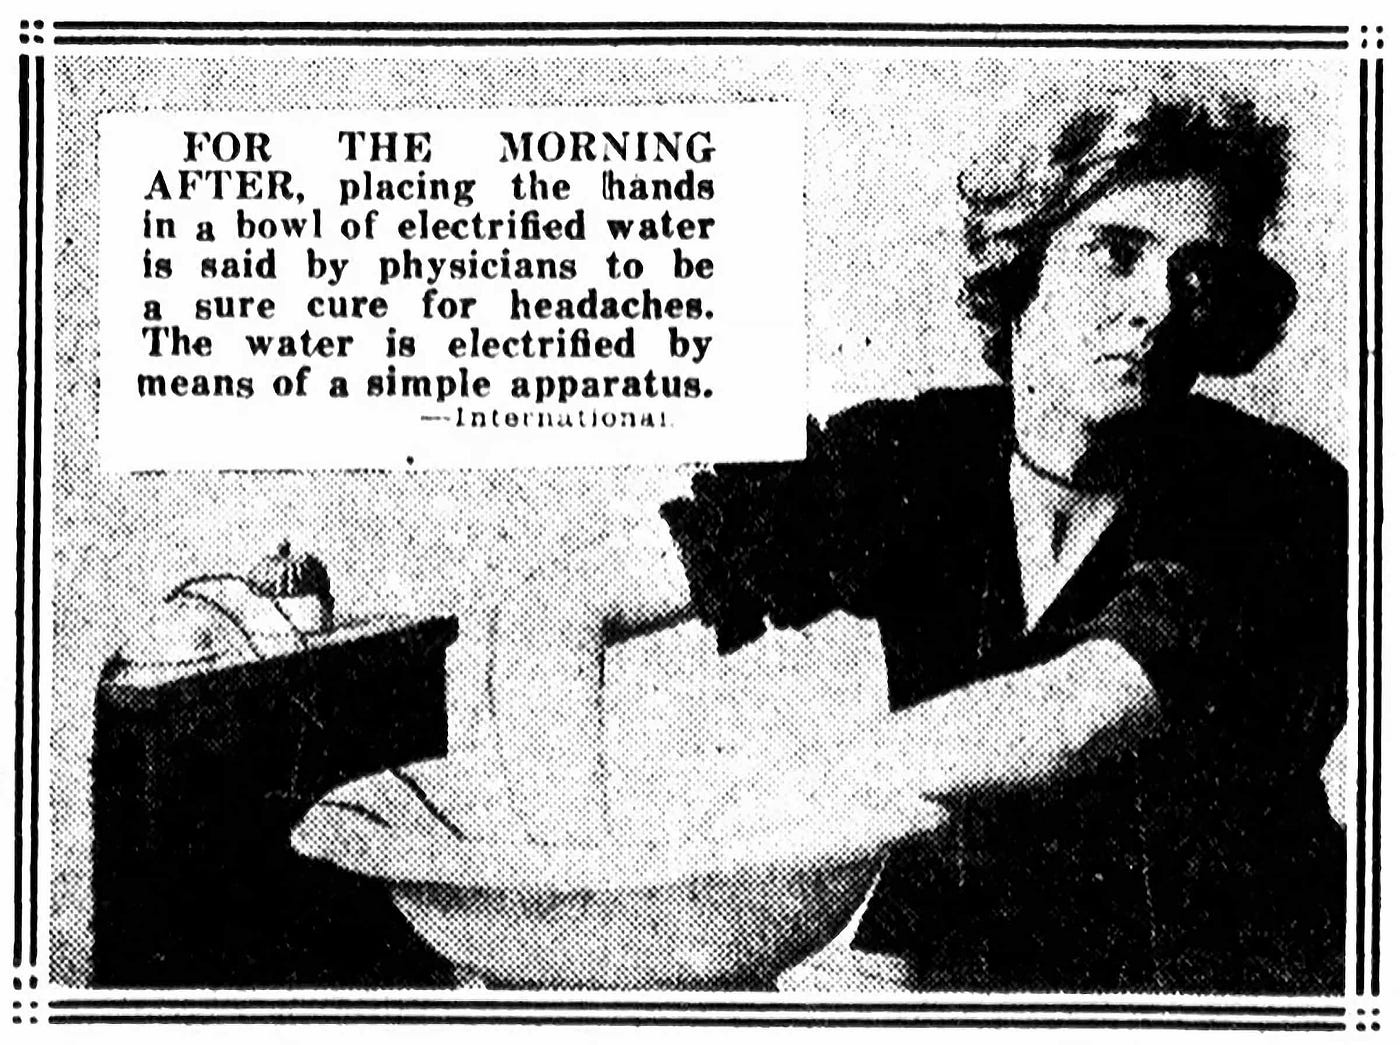 An ad from 1922 for electrified water. A woman holds her hands in a bowl of water that’s connected to a contraption. The ad says, “For the morning after, placing the hands in a bowl of electrified water is said by physicians to be a sure cure for headaches. The water is electrified by means of a simple apparatus.”